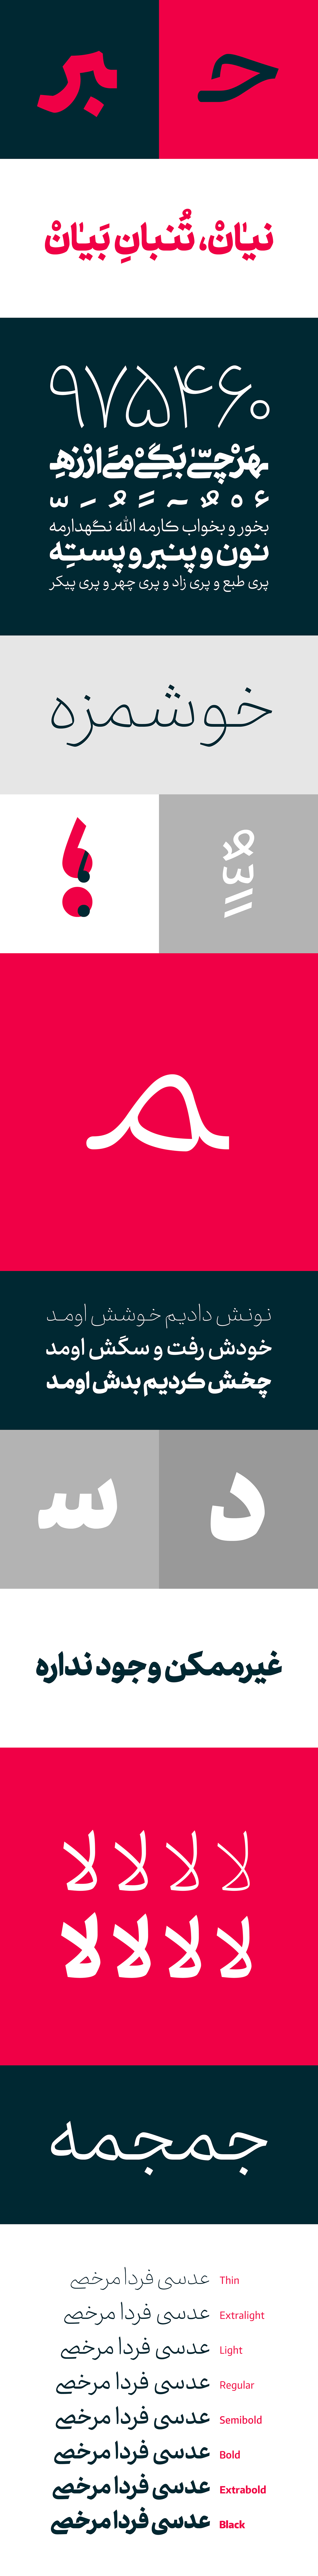 type typography   font Typeface arabic persian qalam خط فونت   تایپ